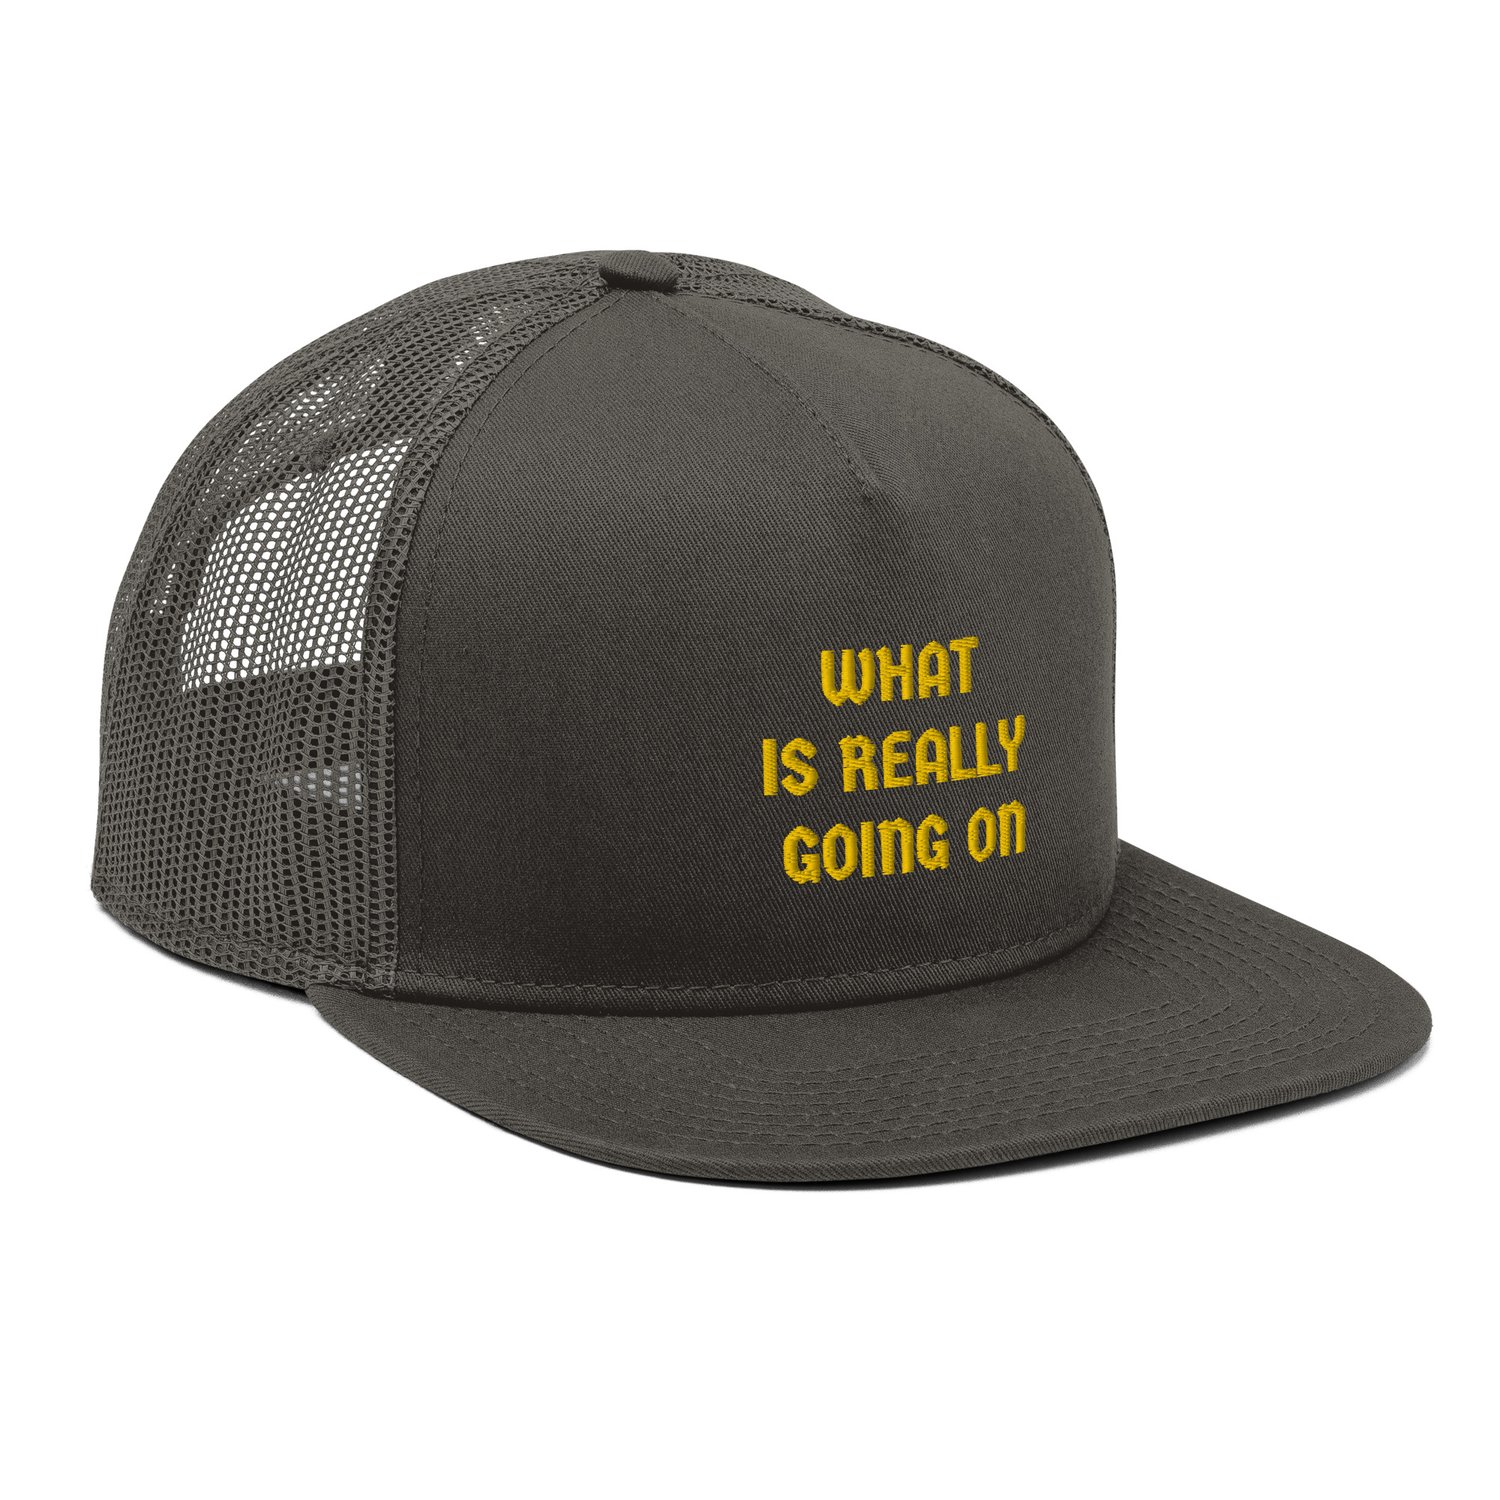 Image of "WHAT IS REALLY GOING ON" Mesh Back Snapback